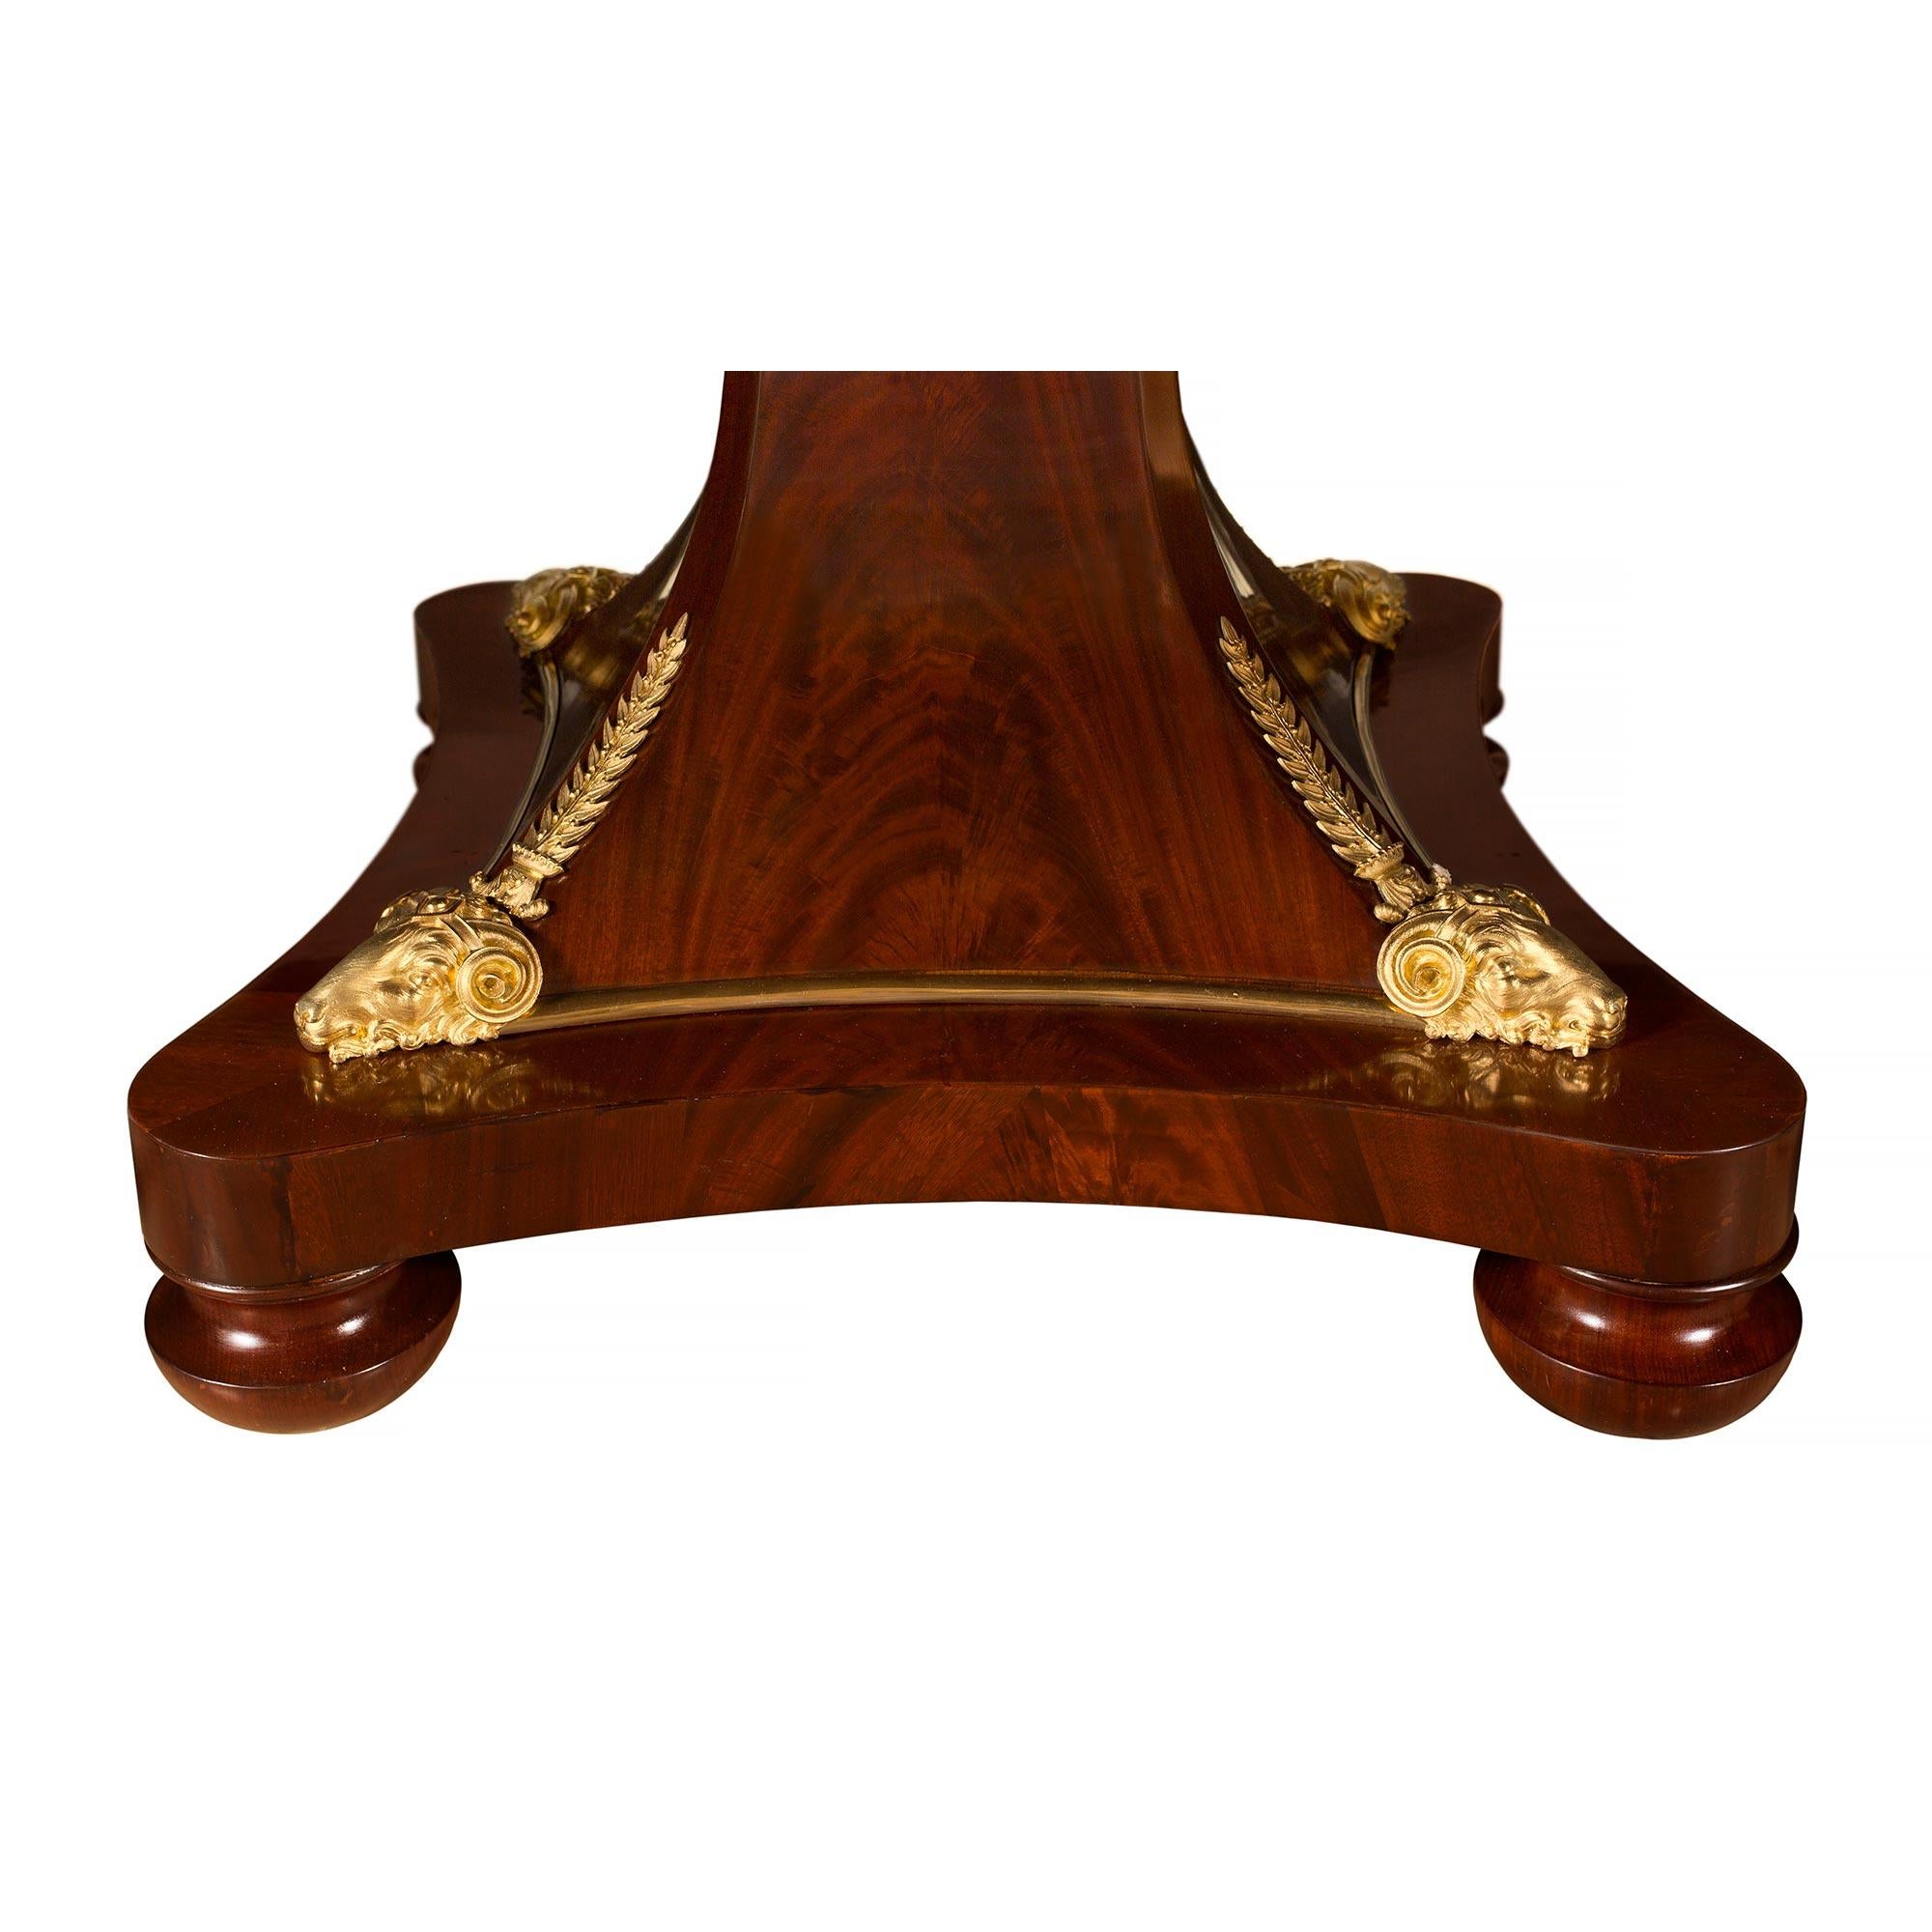 Ormolu French 19th Century Neoclassical St. Dining Table, Once Owned by Gianni Versace For Sale